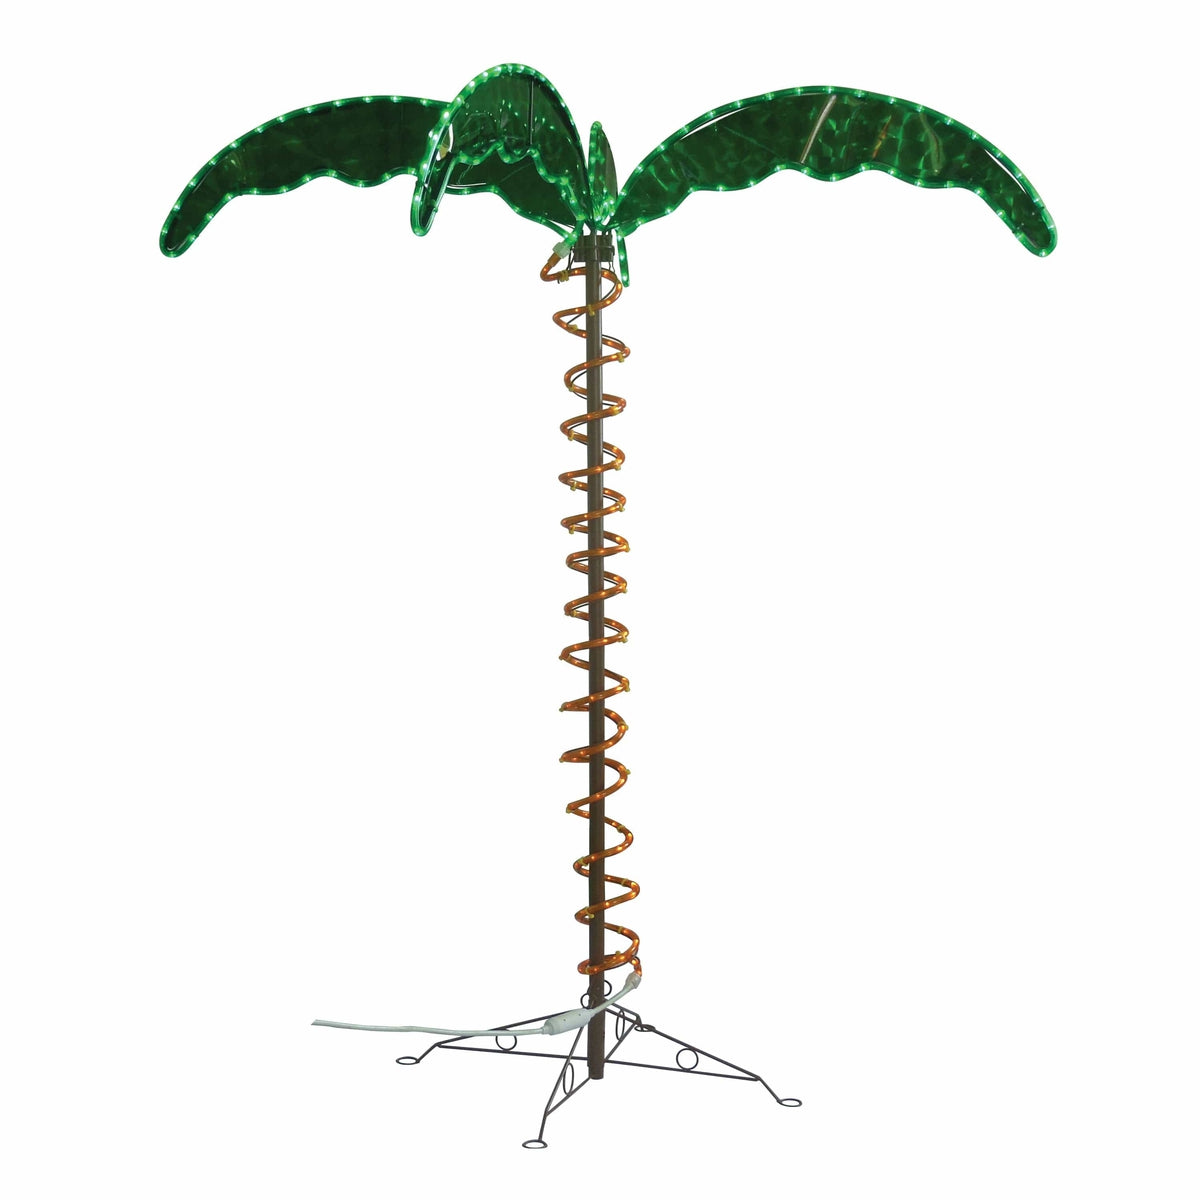 Ming's Mark Qualifies for Free Shipping Ming's Mark Green LongLife Decorative Palm Tree Rope Lights 4.5' #8080103